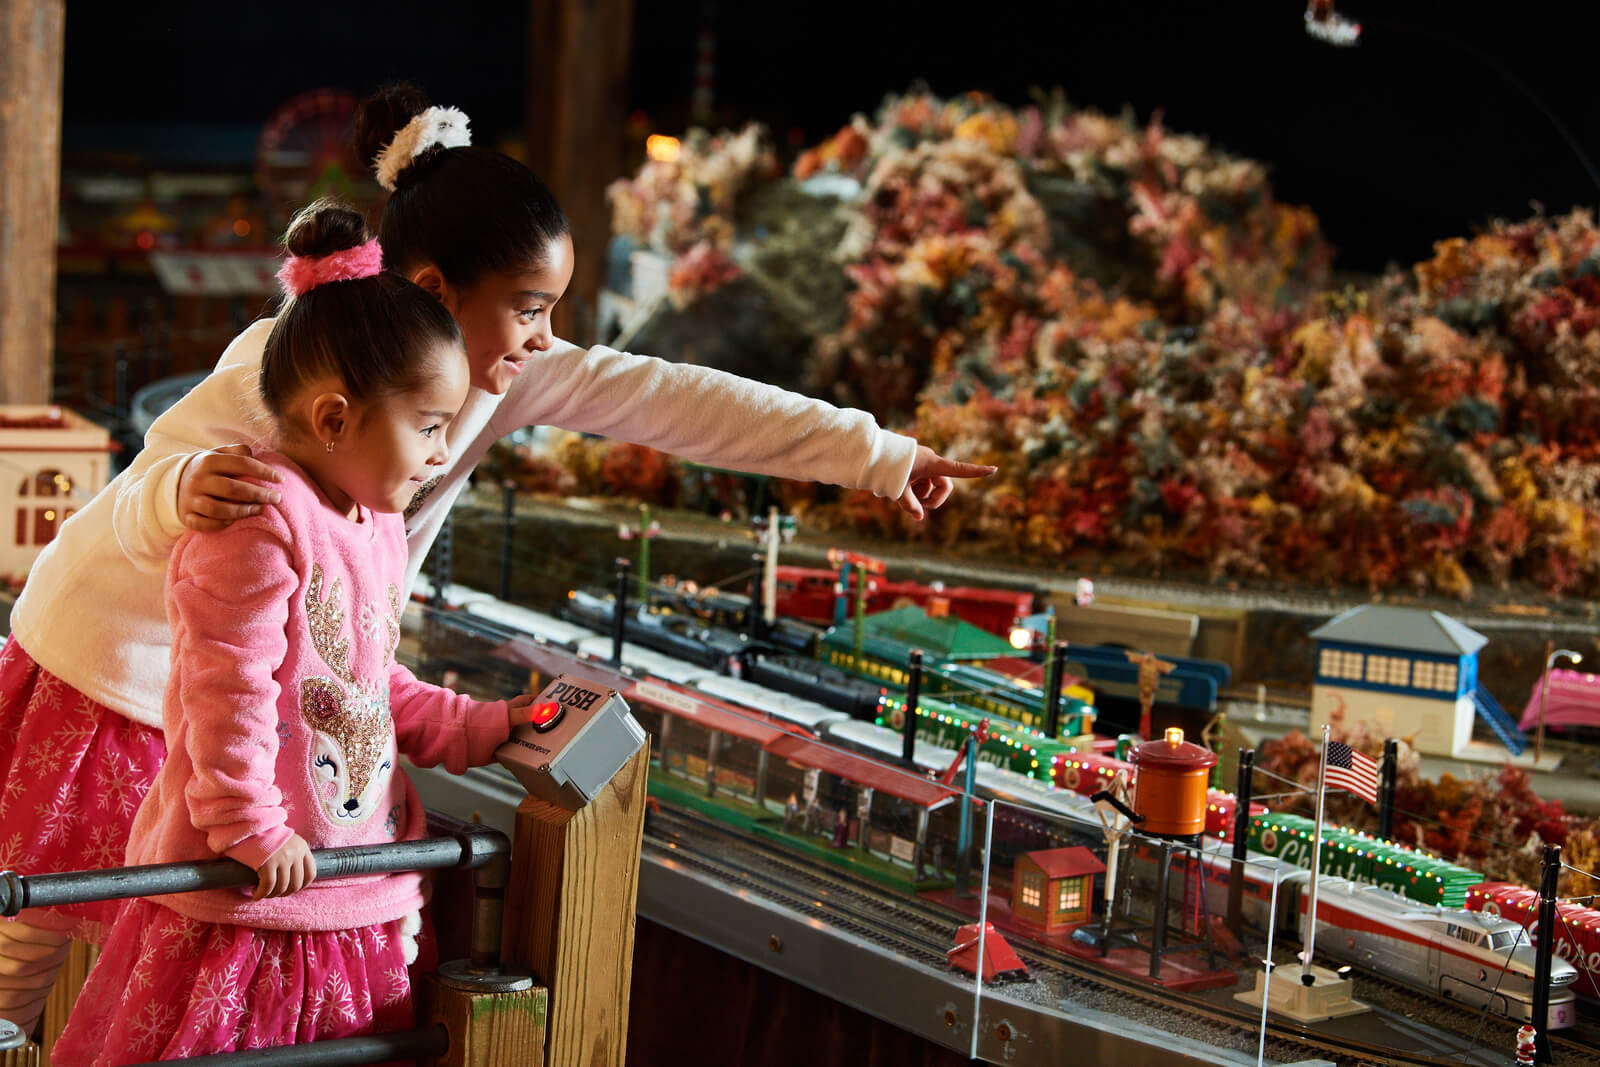 Two kids looking and pointing at the model trains.